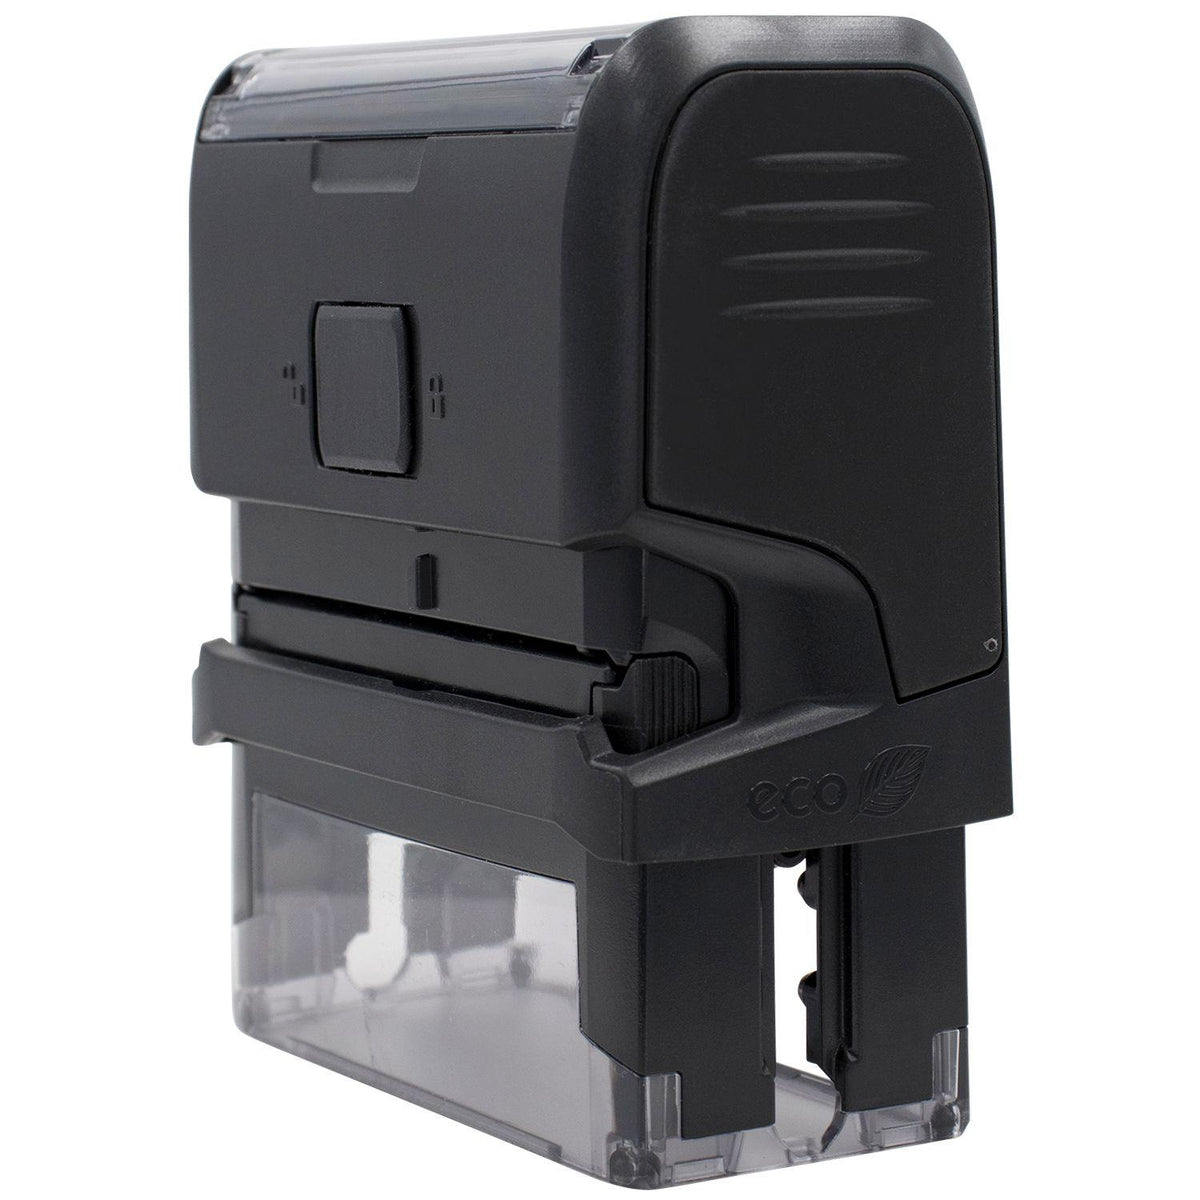 Side View of Large Self-Inking Borrador Stamp at an Angle